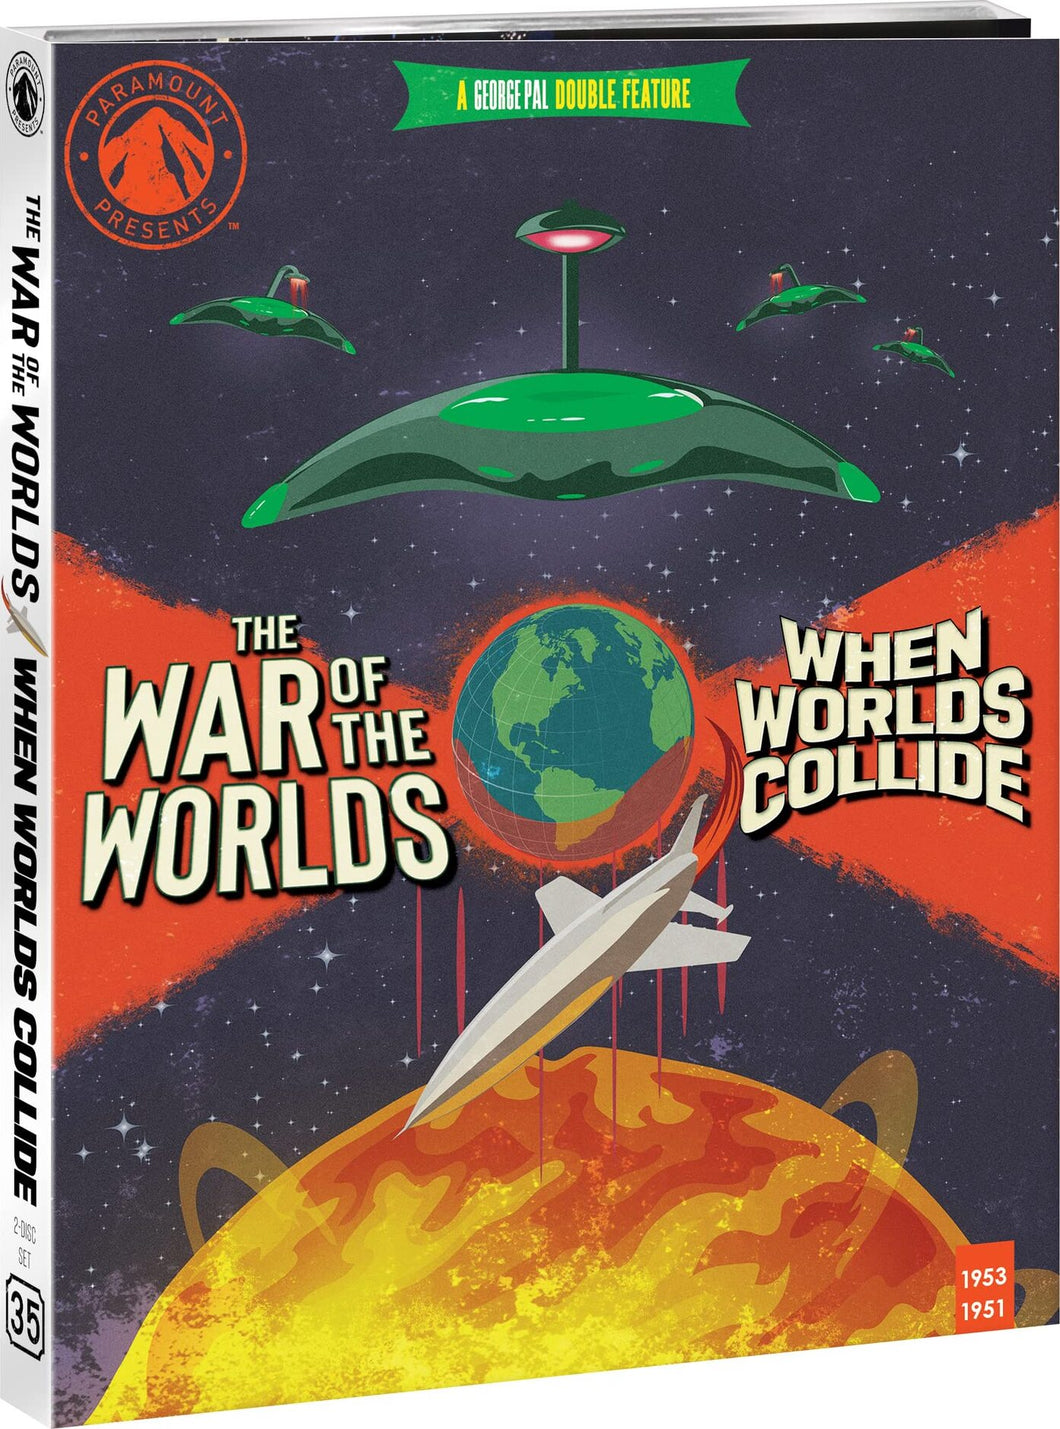 The War of the Worlds 4K + When Worlds Collide on Blu-ray (1951-1953) - front cover